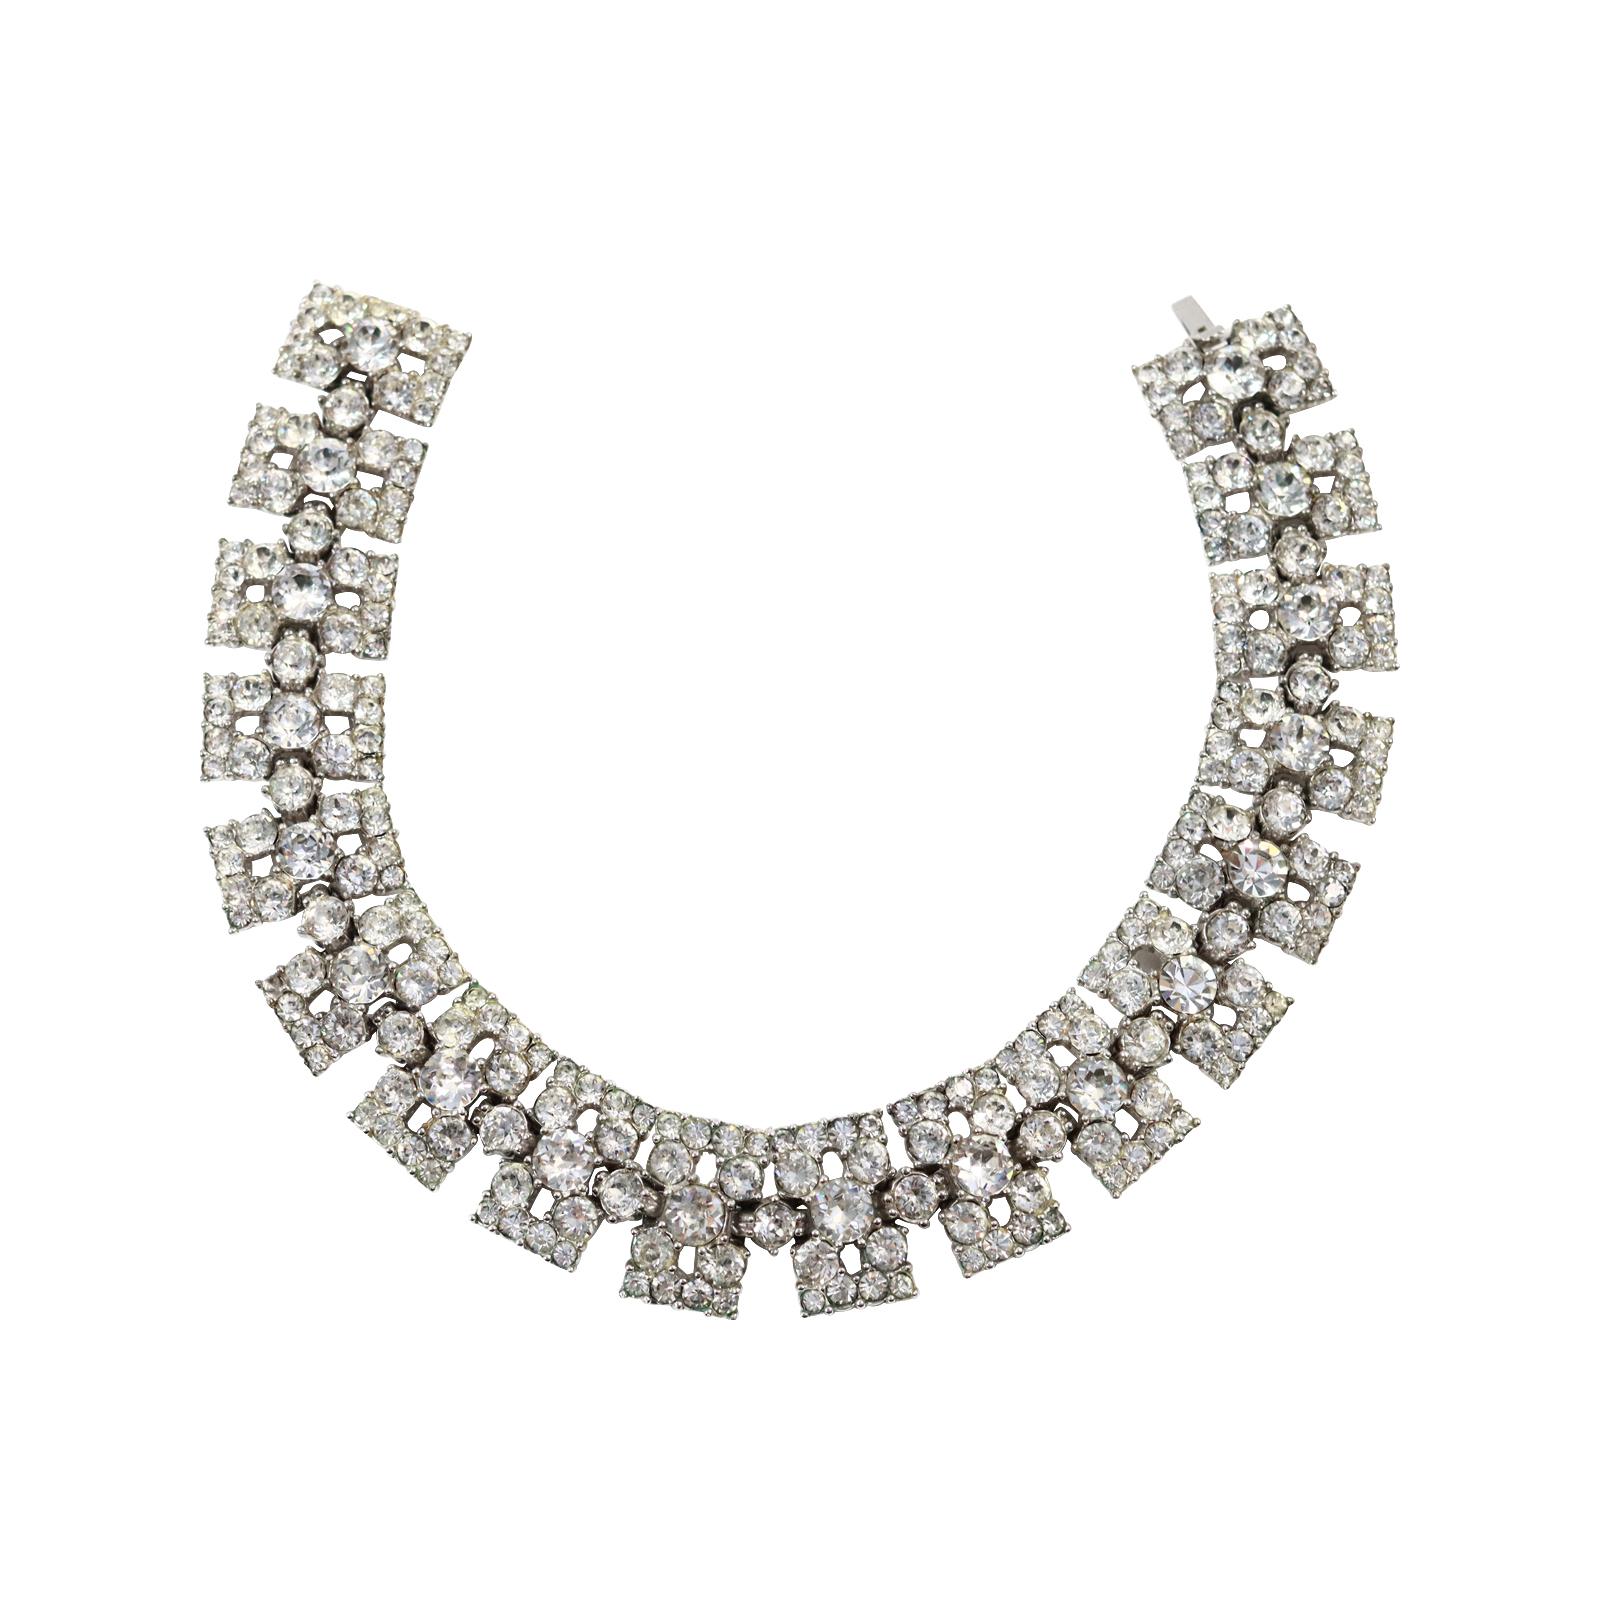 Vintage Bogoff Diamante Choker Necklace Circa 1960s. This is so chic and yes chokers are back. This is heavy and substantial and well made.  These are all constructed with round stones of various sizes.  This particular look reminds me of the